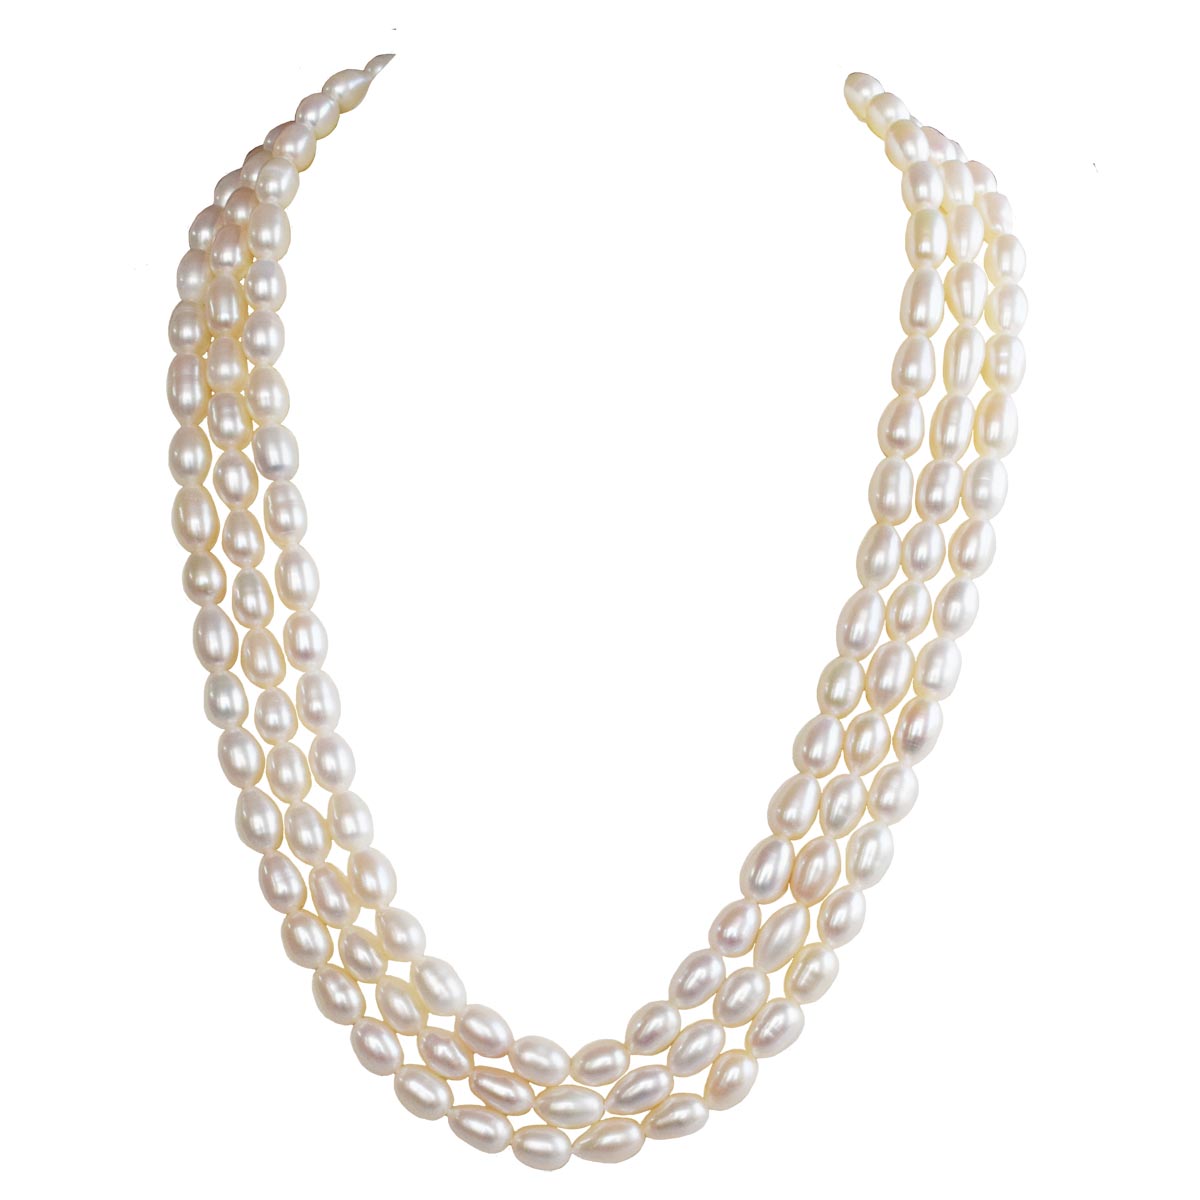 3 Line Real Big Elongated Pearl Necklace for Women (SN1009)